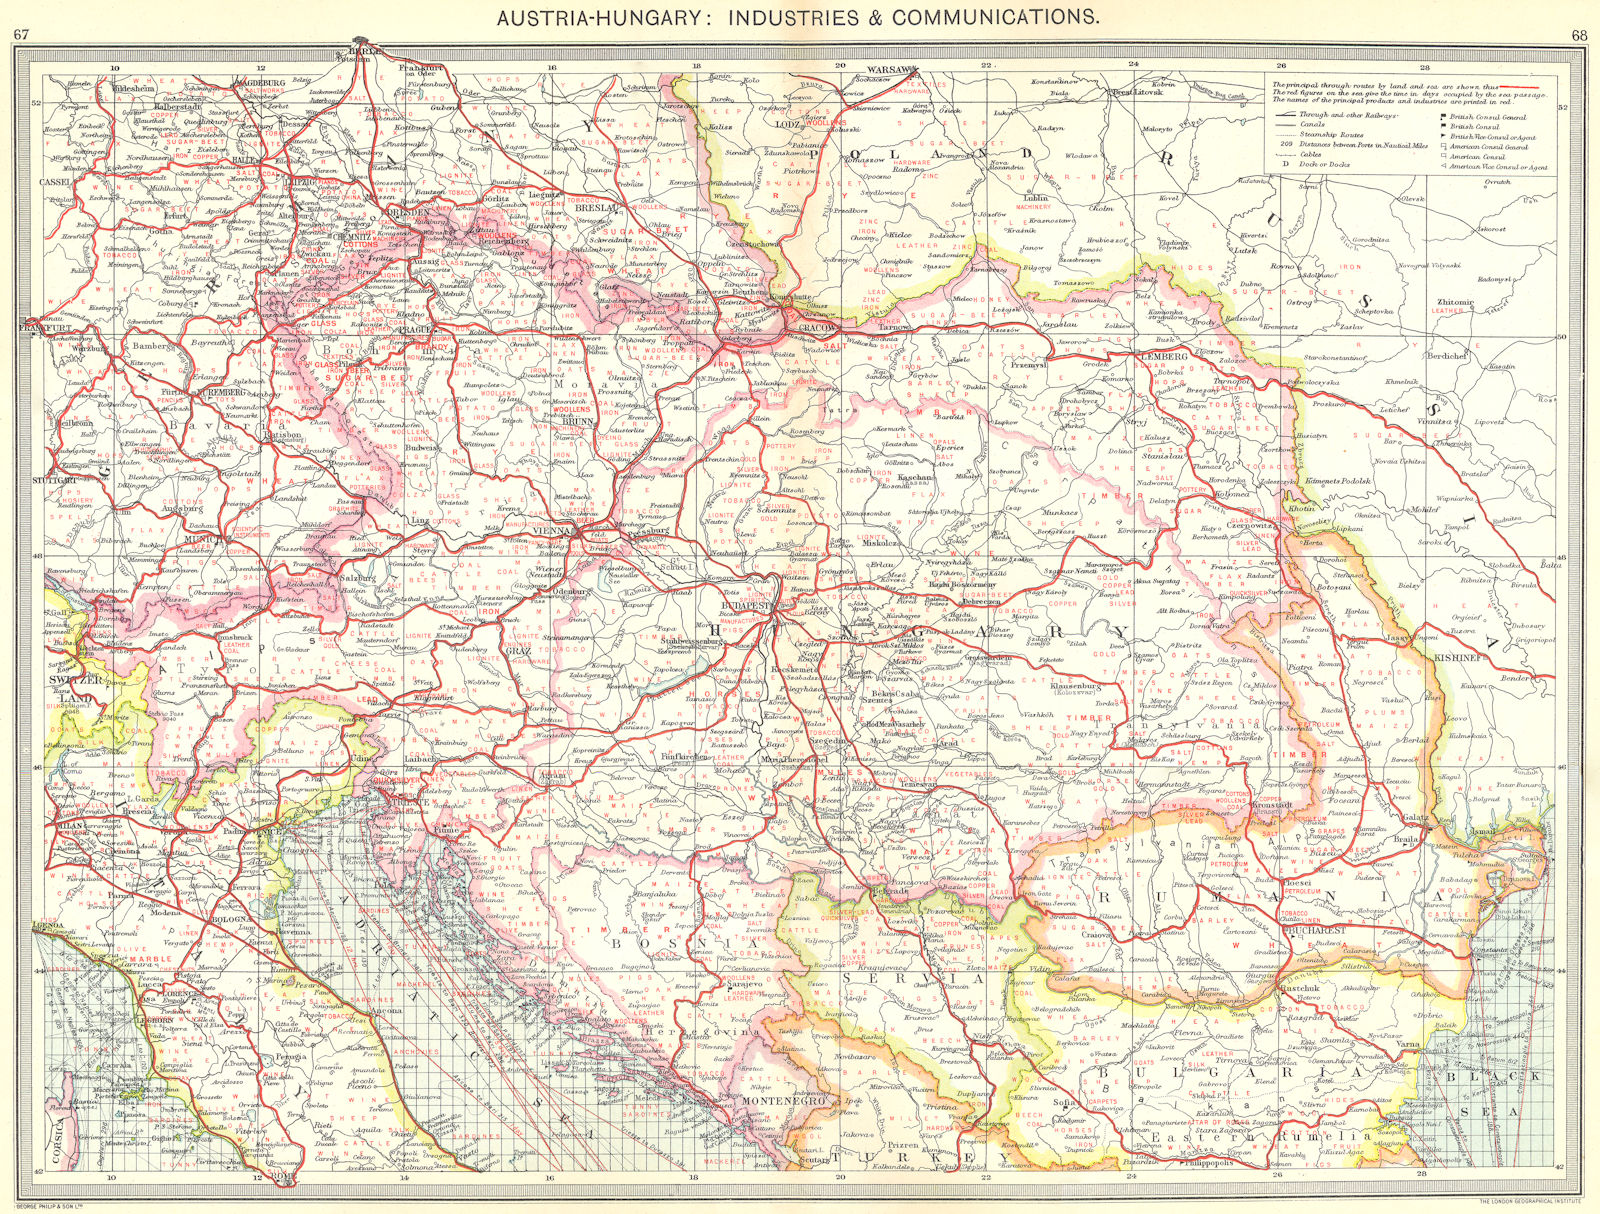 AUSTRIA. Austria-Hungary. Industries and Communications 1907 old antique map